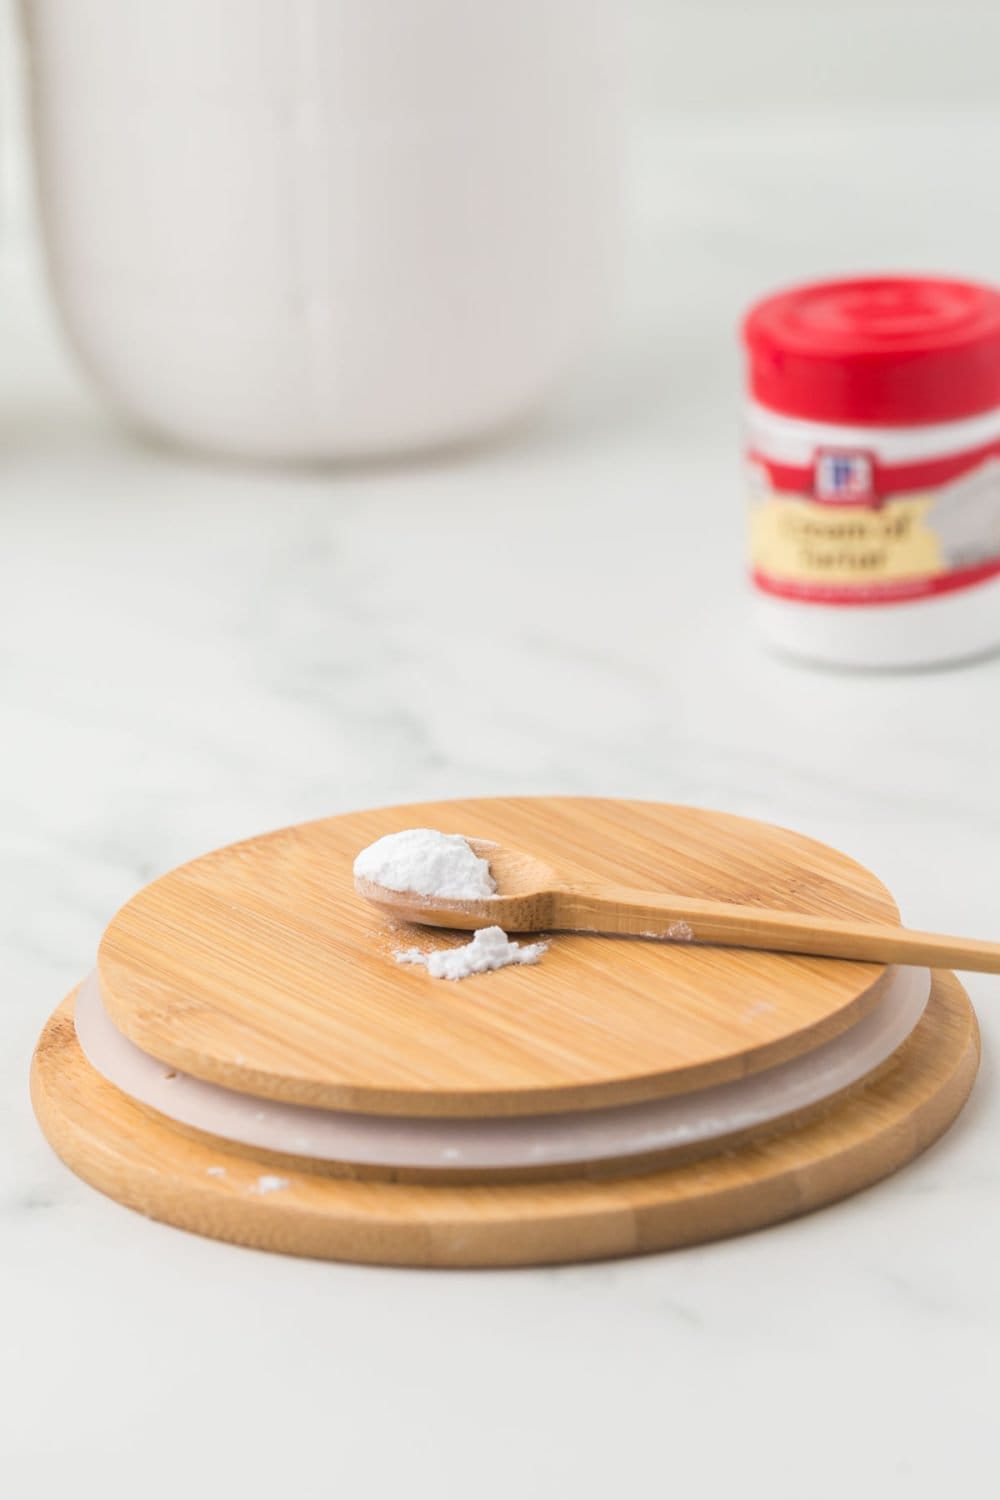 small jar of McCormick cream of tartar with a red lid on a wooden board